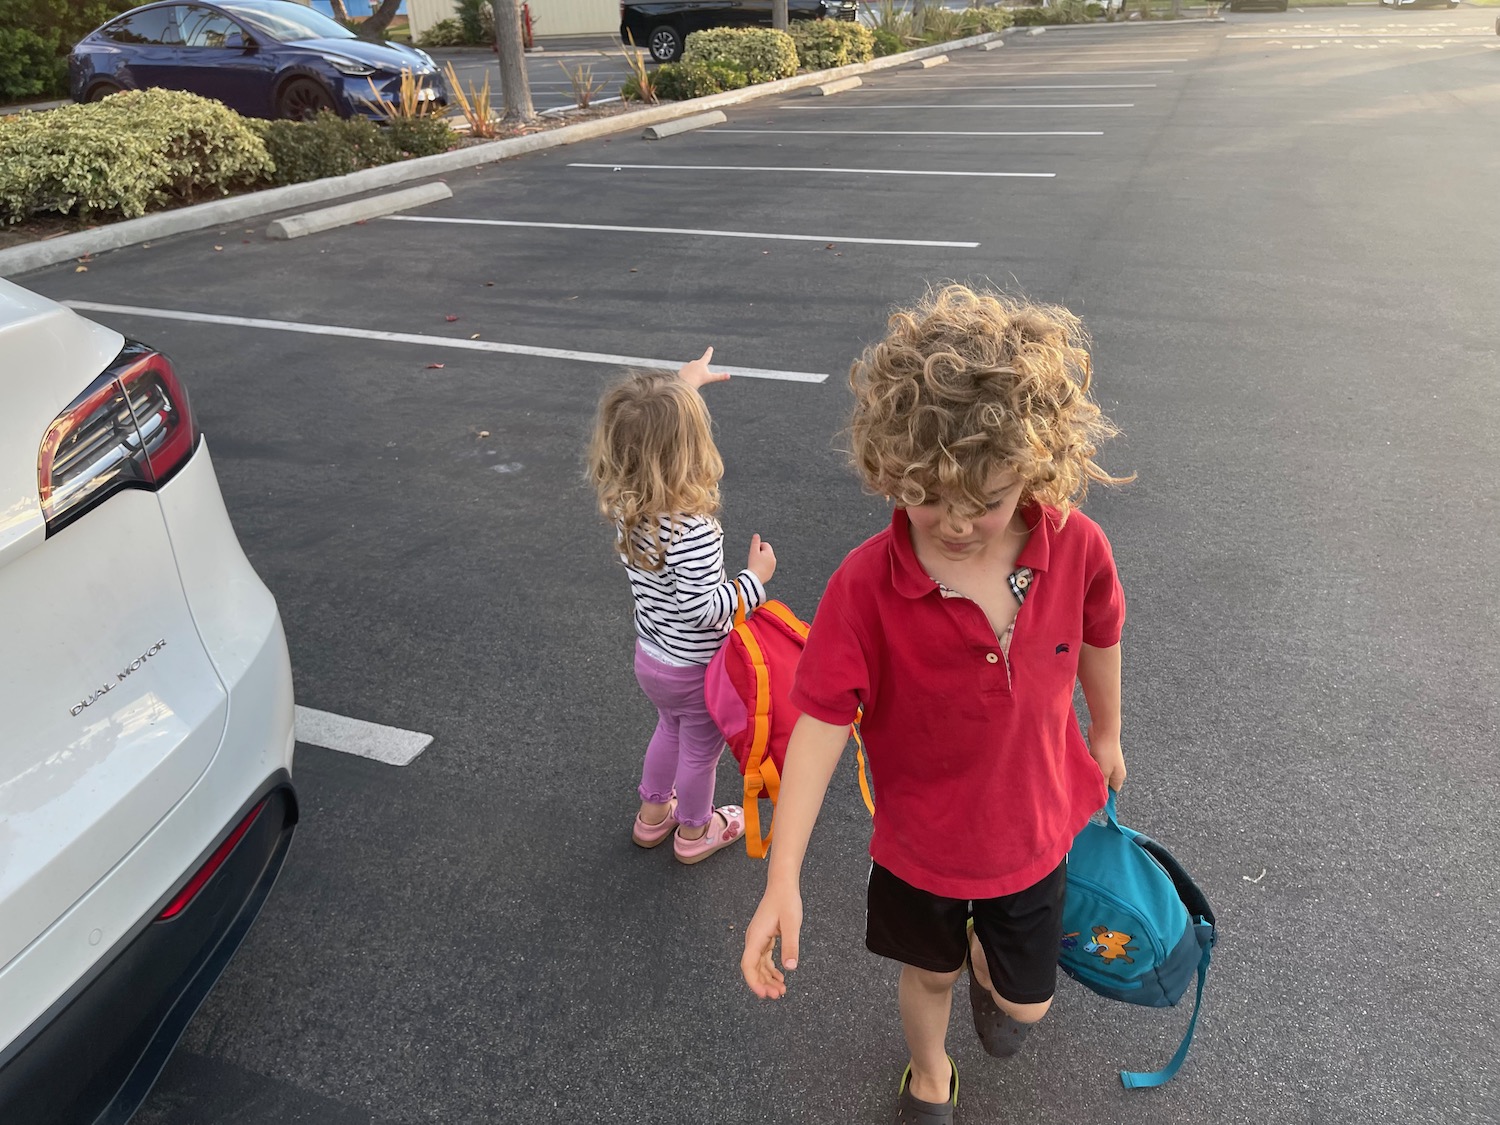 a boy and girl walking in a parking lot